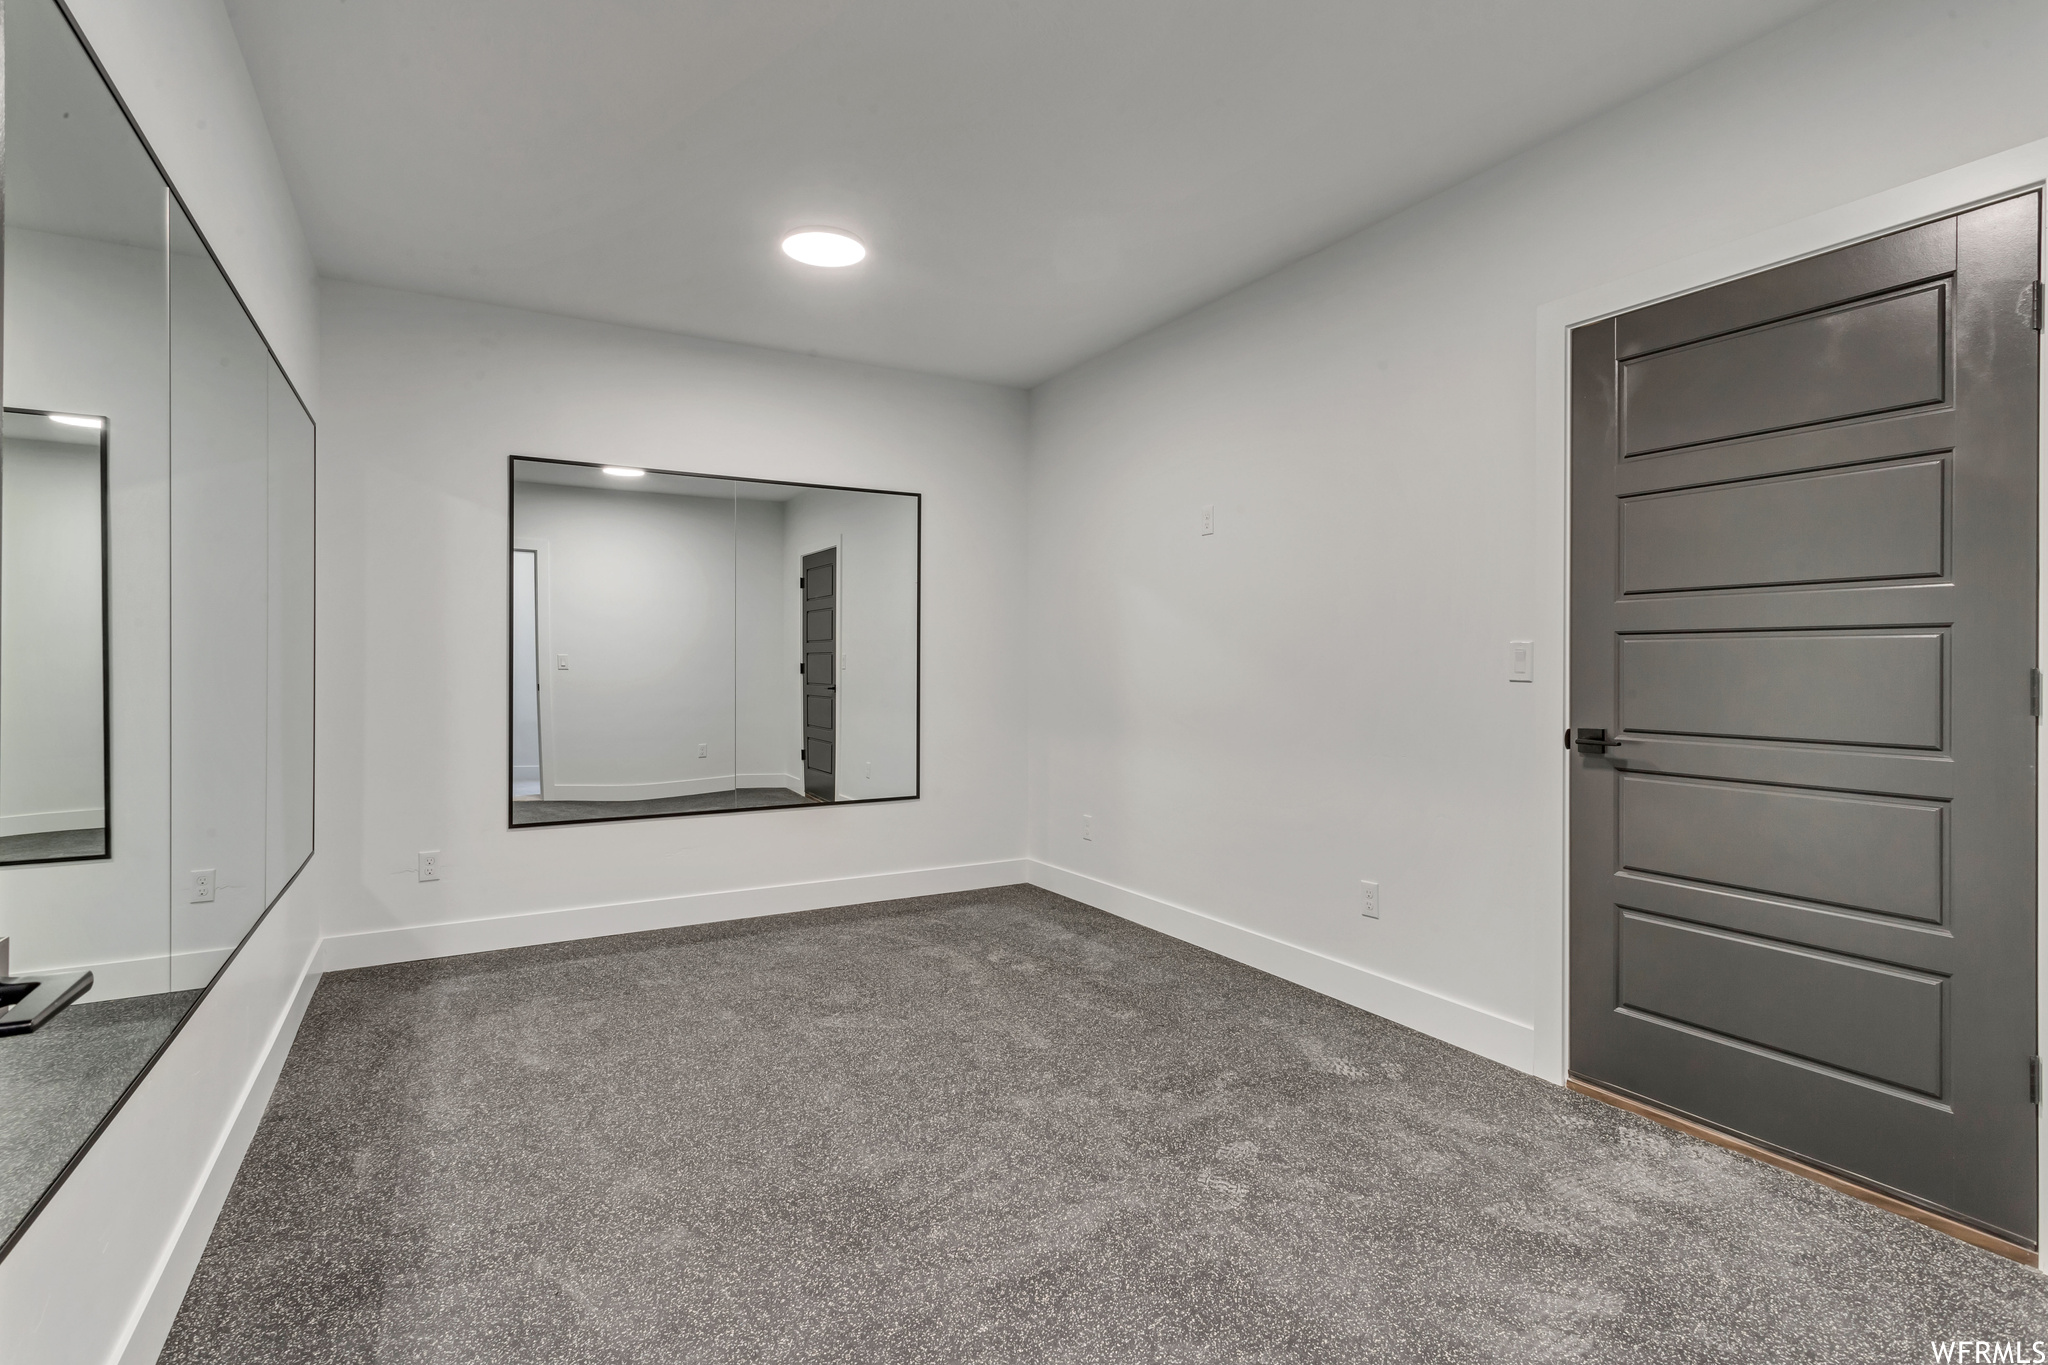 These owners chose to add specialty flooring and mirrors to create a gym room in their basement